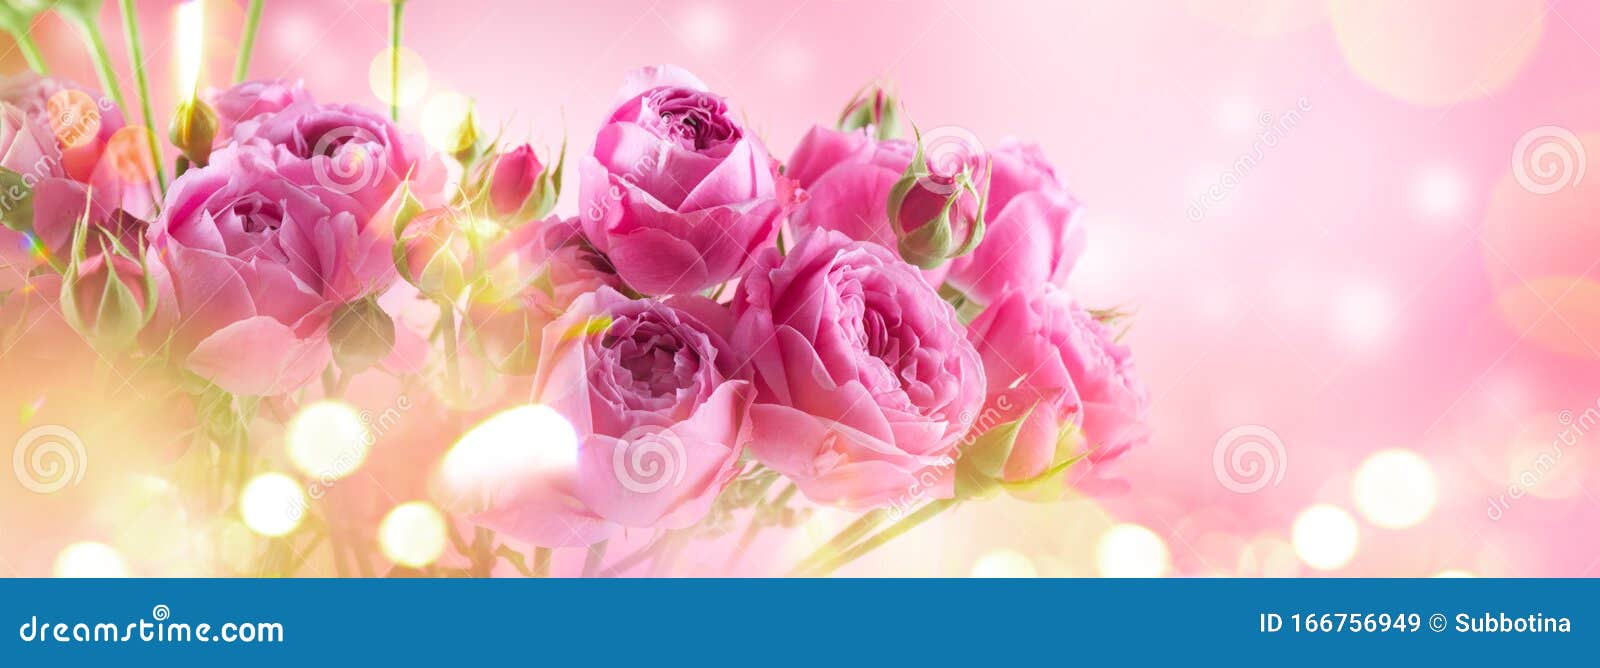 501 531 Roses Photos Free Royalty Free Stock Photos From Dreamstime